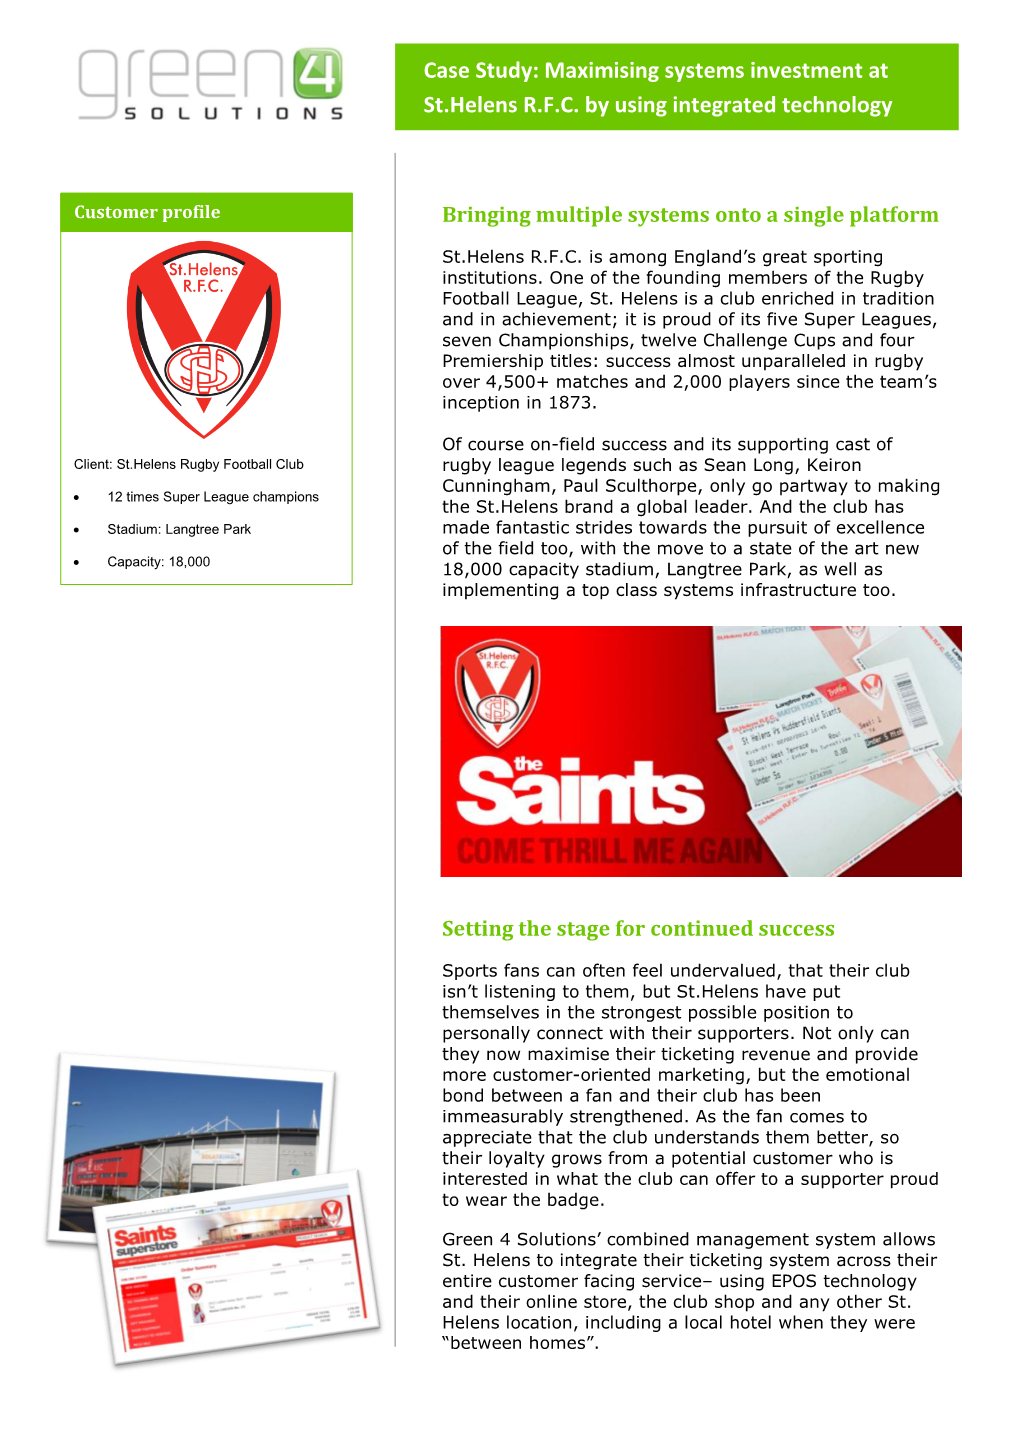 Maximising Systems Investment at St.Helens RFC by Using